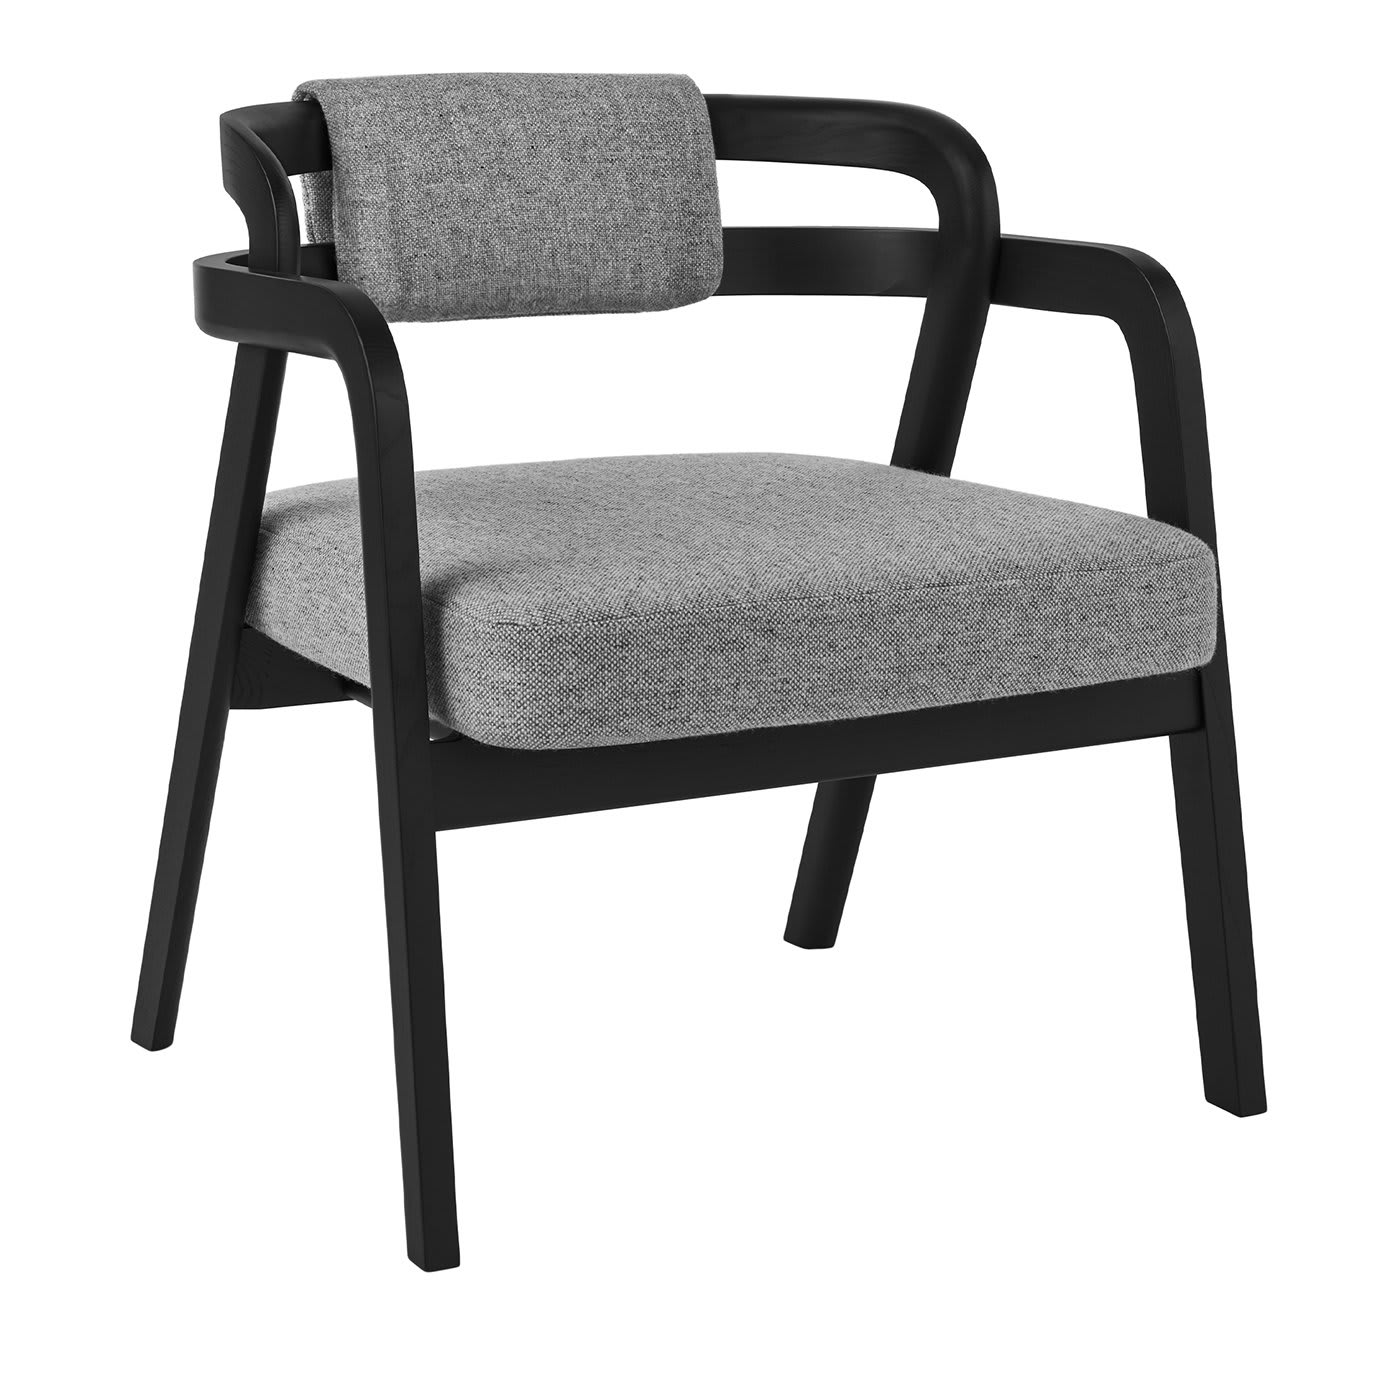 Genea Lazy Black Ash Lounge chair with Gray Upholstered Seat and Back - Passoni Design